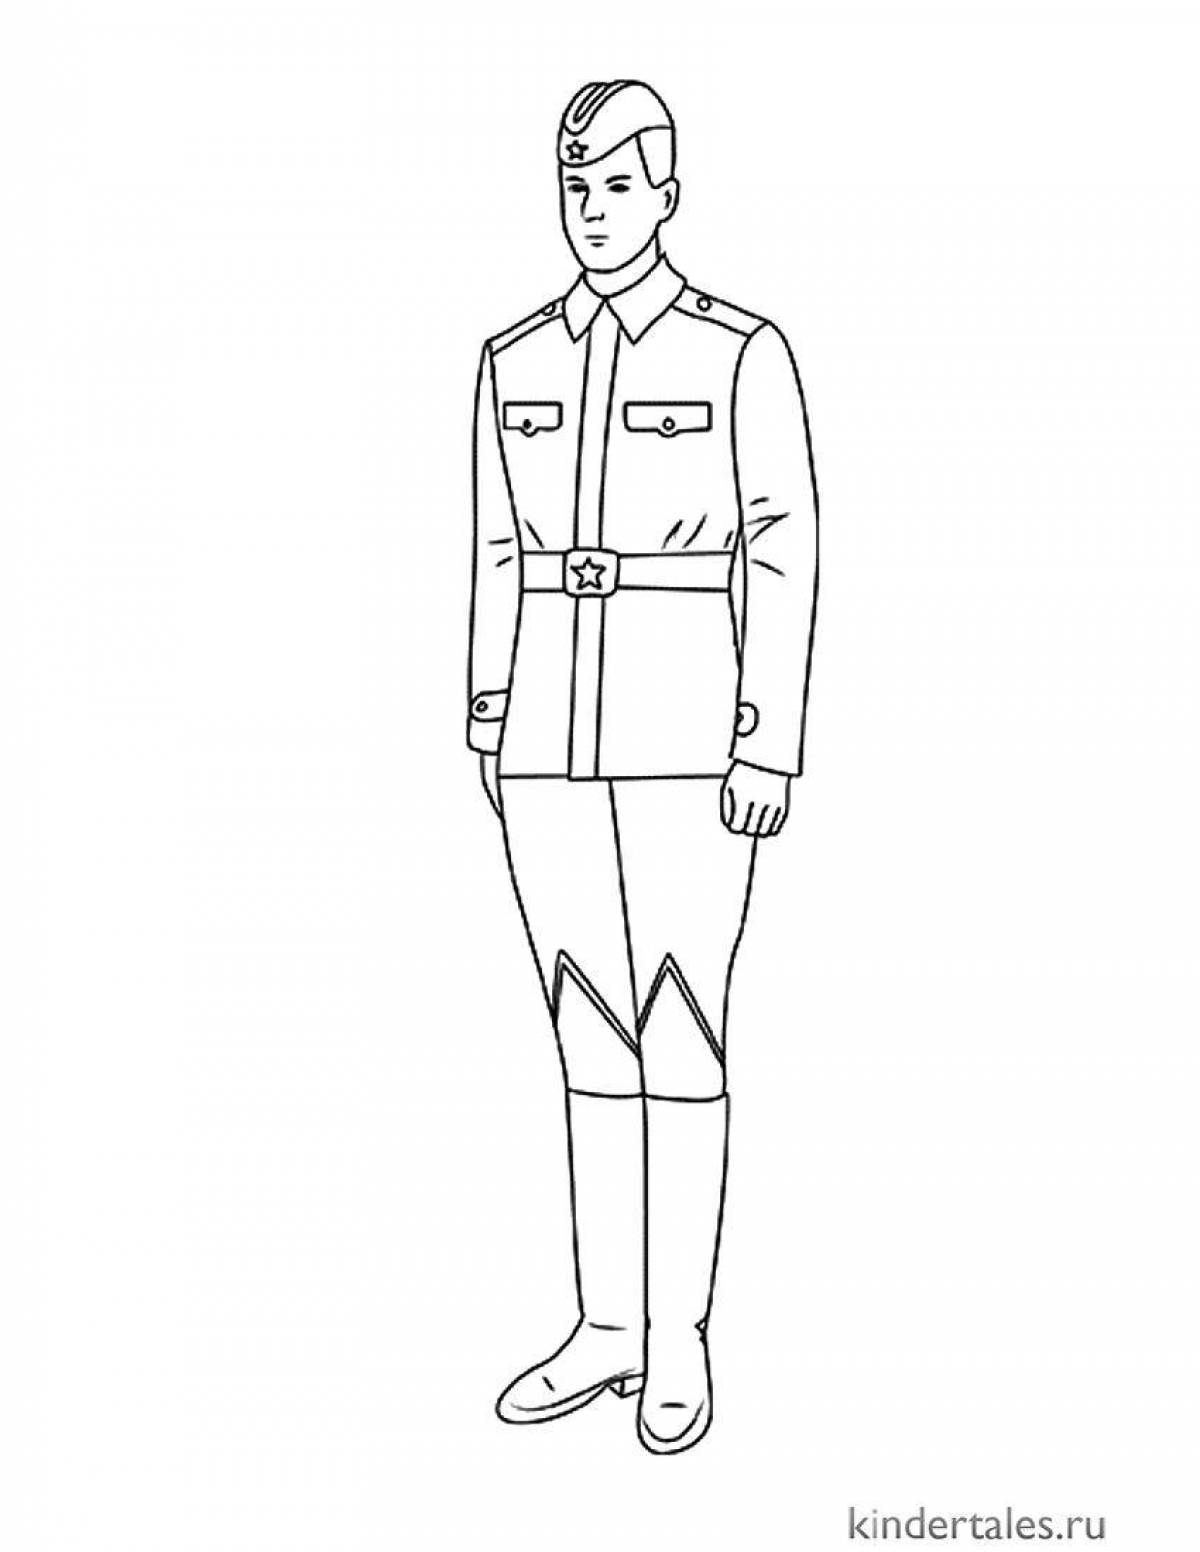 An elegant soldier at the post drawing